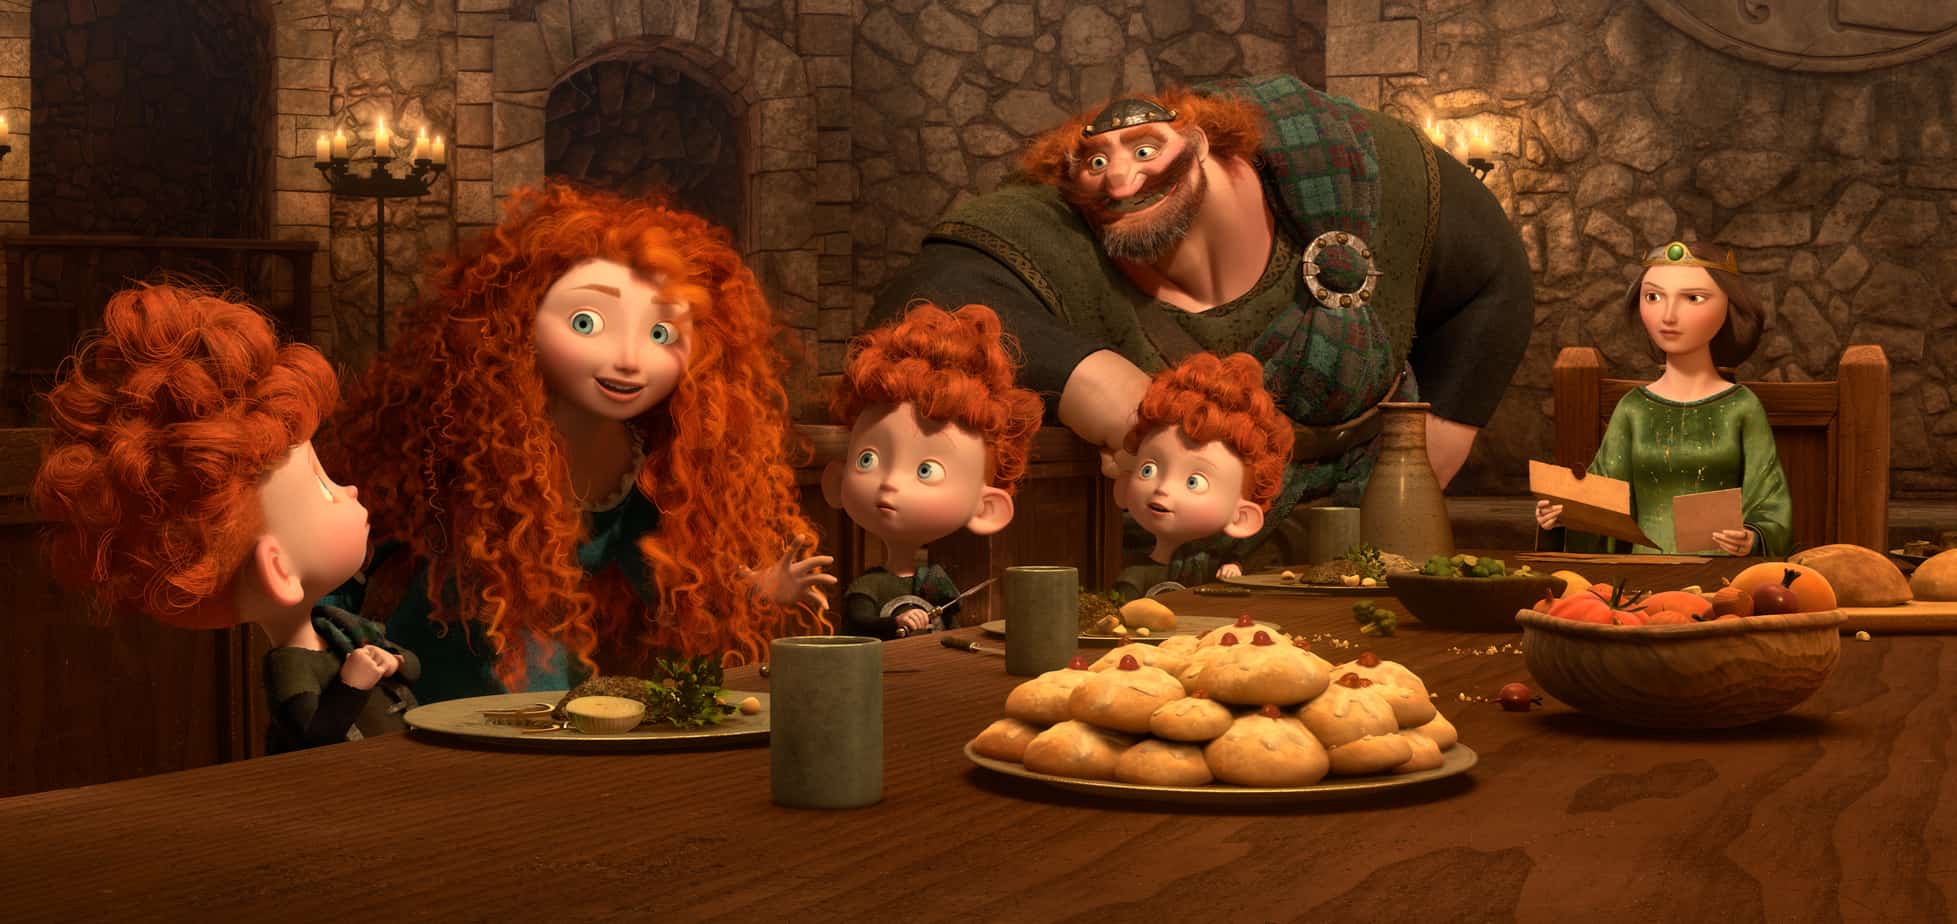 “BRAVE” (L-R) MERIDA amongst the triplets: HARRIS, HUBERT and HAMISH; KING FERGUS and QUEEN ELINOR. ©2012 Disney/Pixar. All Rights Reserved.